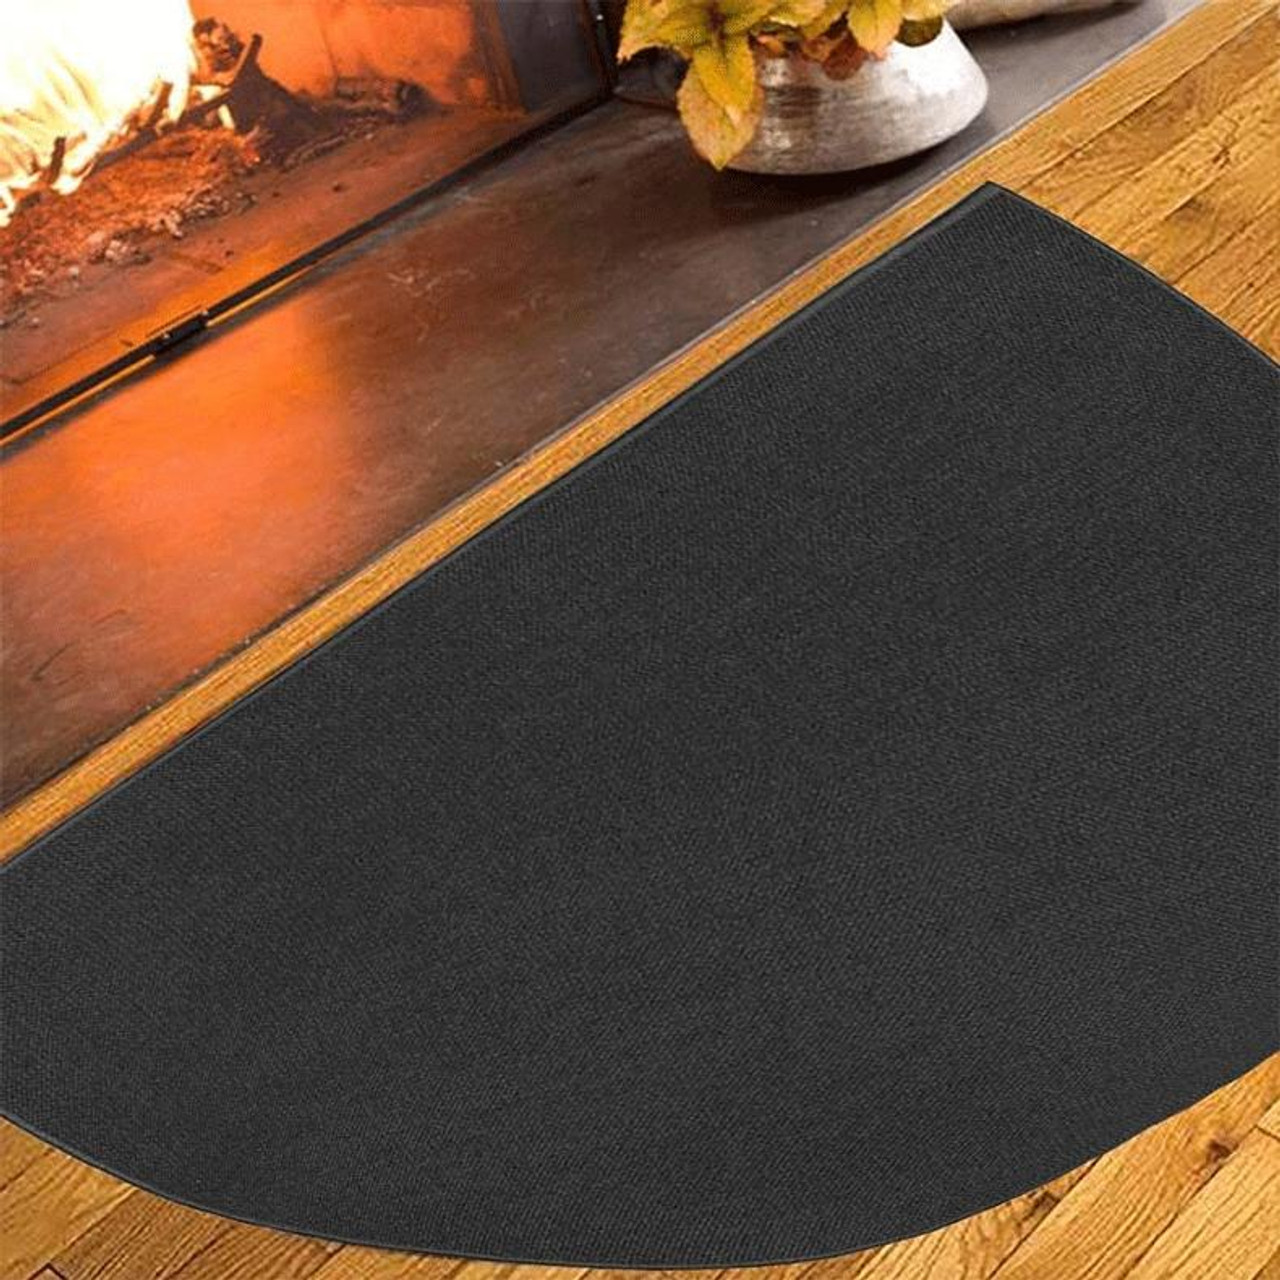 2 PCS Magnetic Fireplace Draft Stopper Fireplace Cover to Block Cold Air  101.6 x 15.24cm